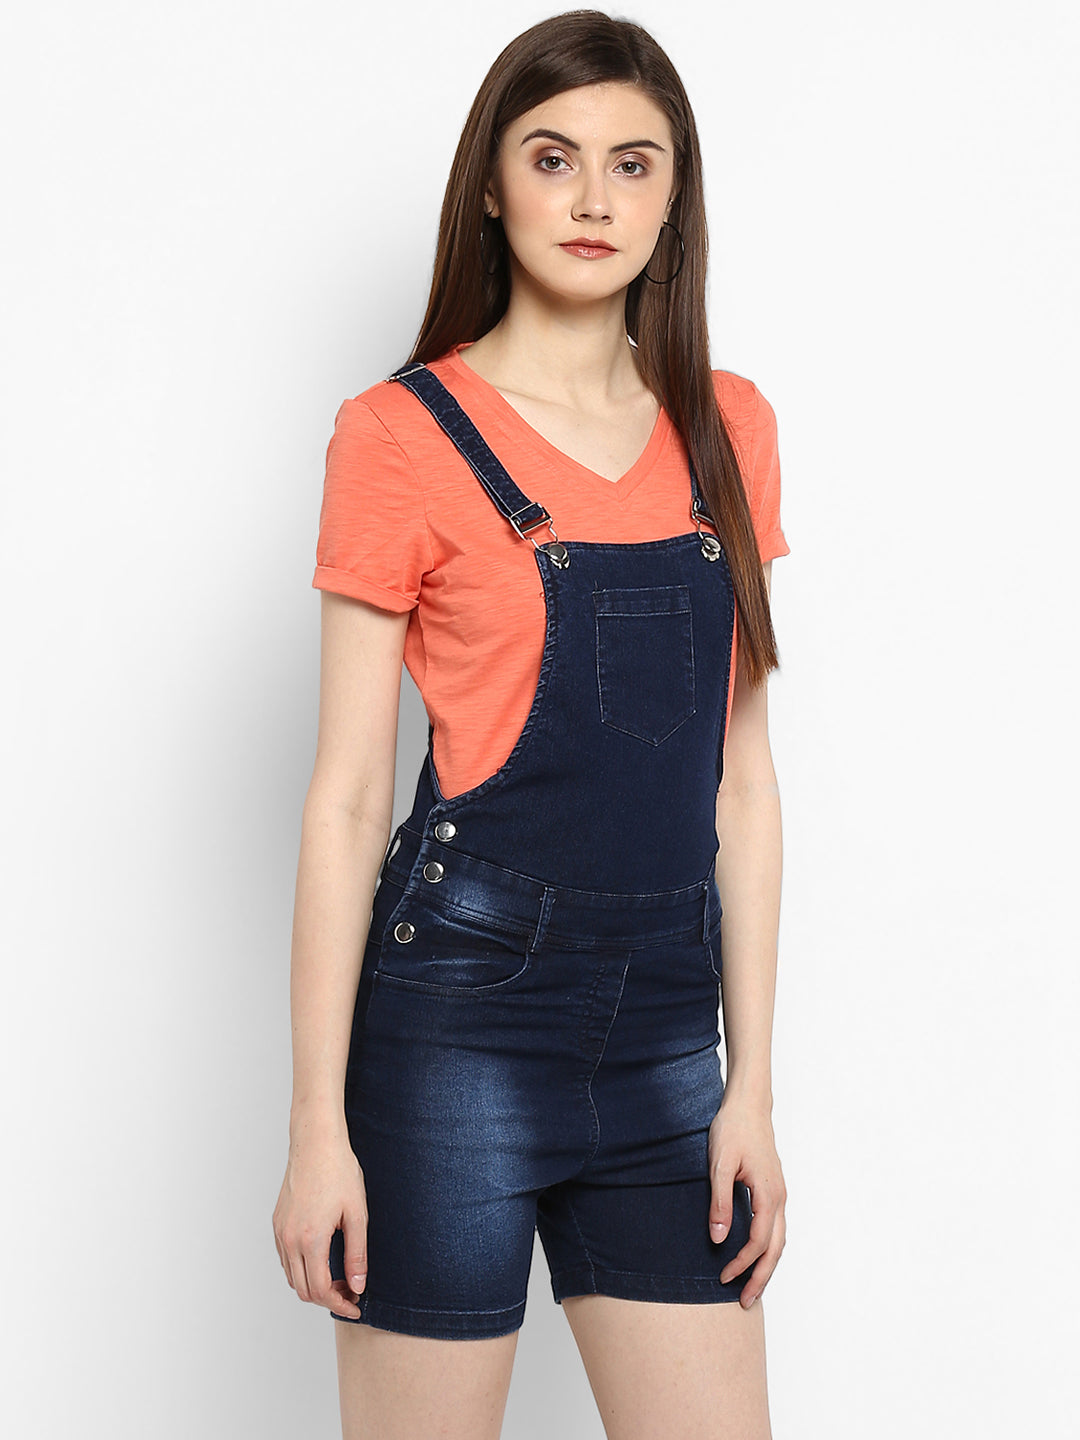 Women's Stretchable Denim Washed effect Shorts Style Dungarees(inner not provided)